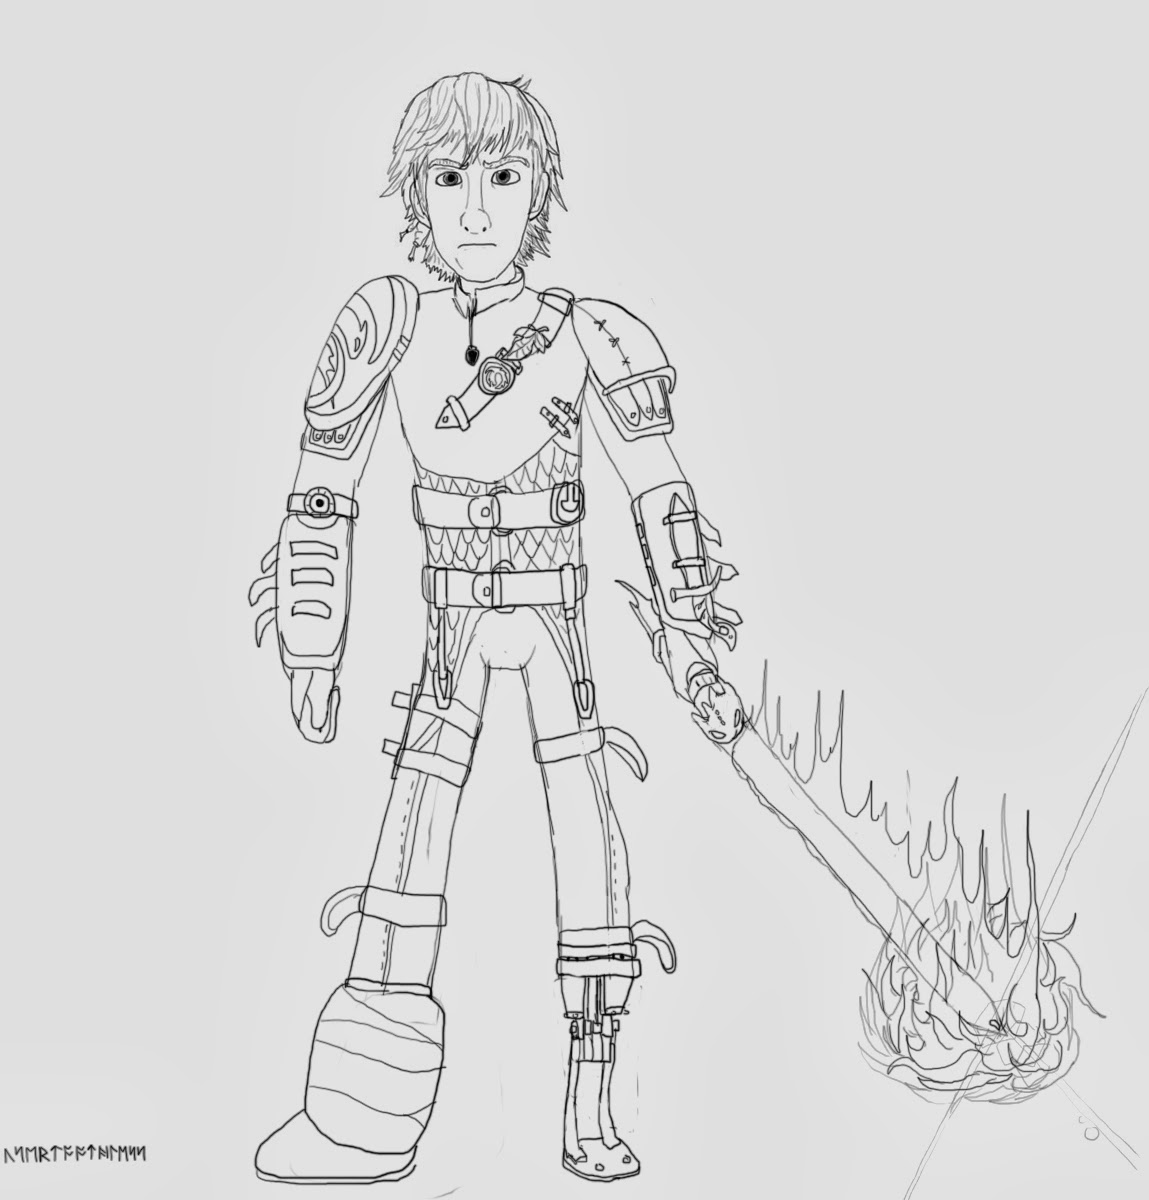 hiccup how to train your dragon 2 drawing